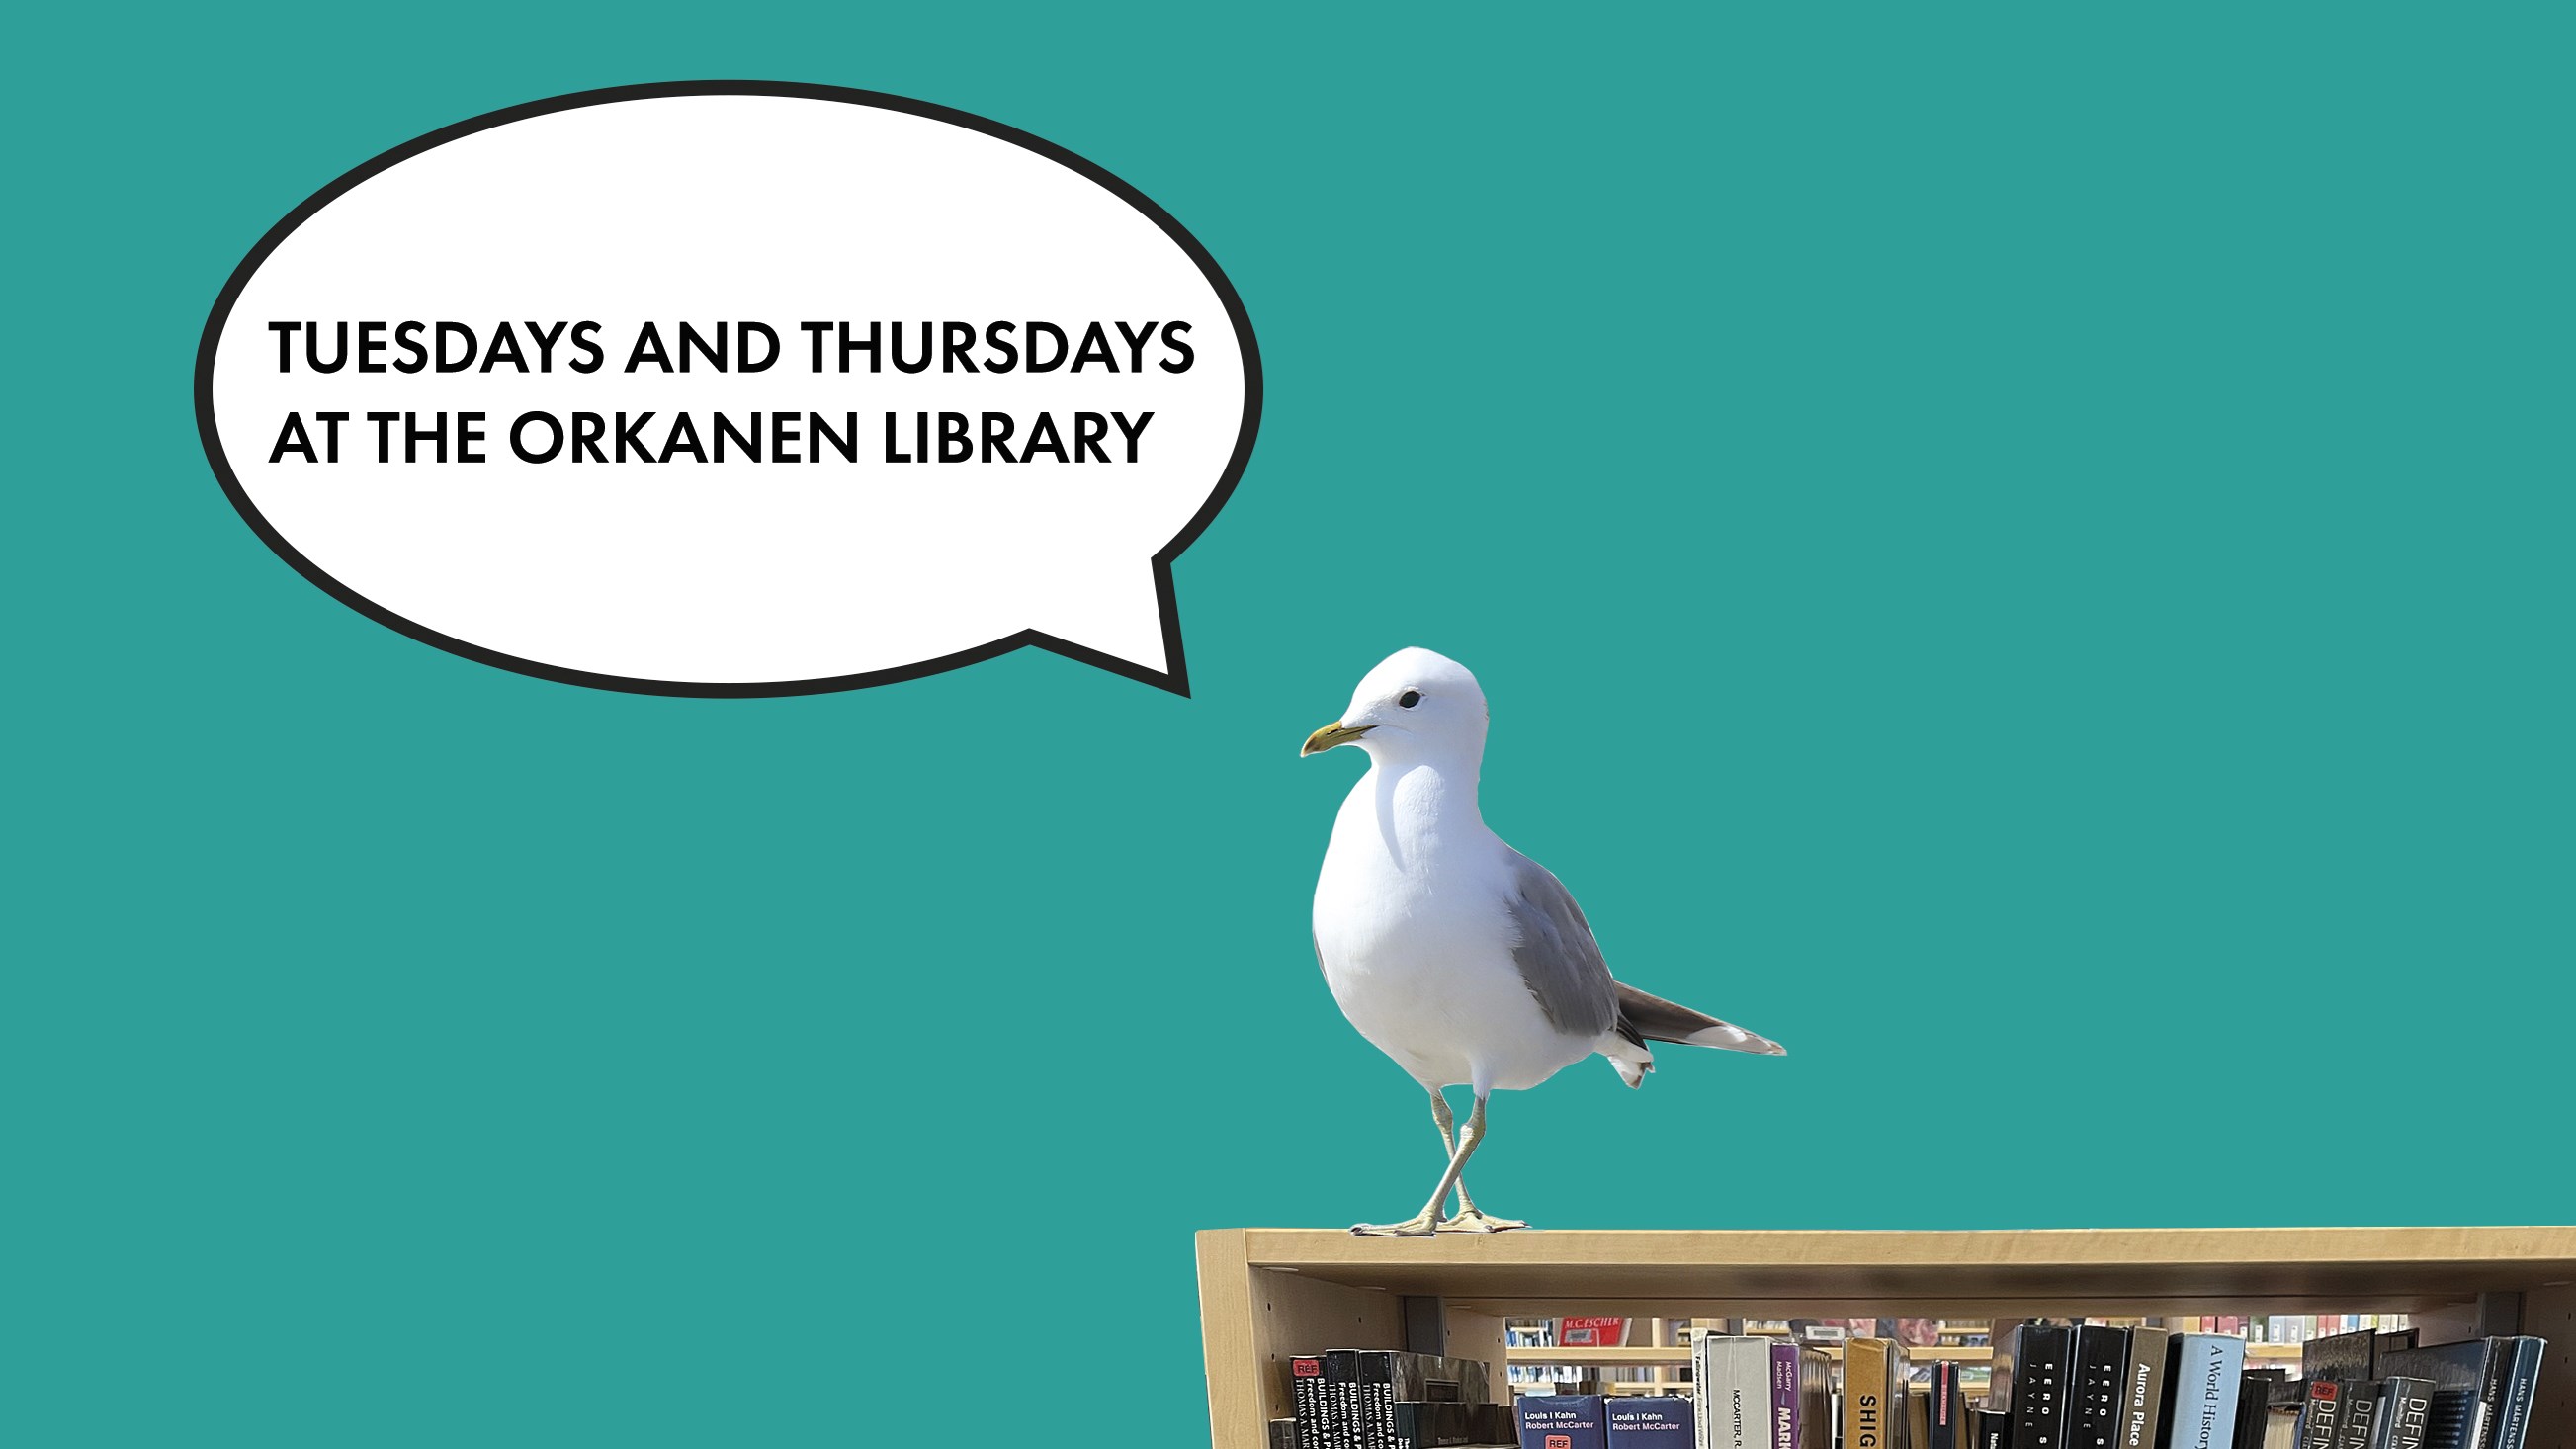 Tuesdays and thursdays at the Orkanen Library